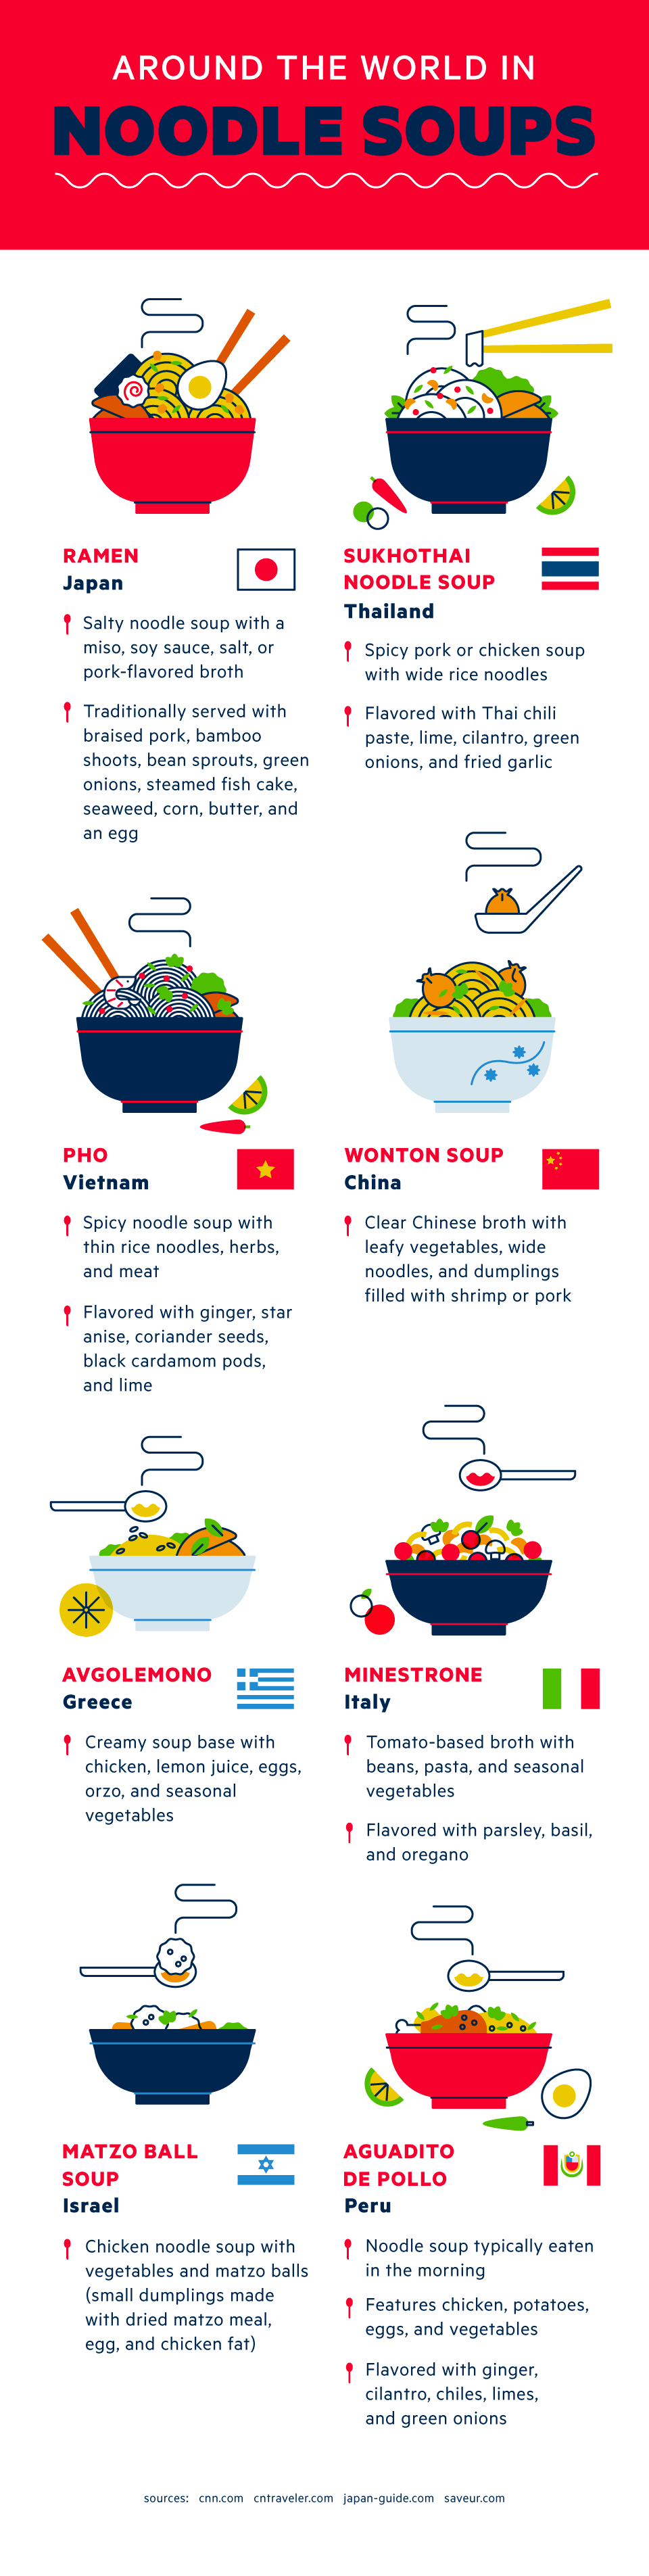 Around the World in Noodle Soups